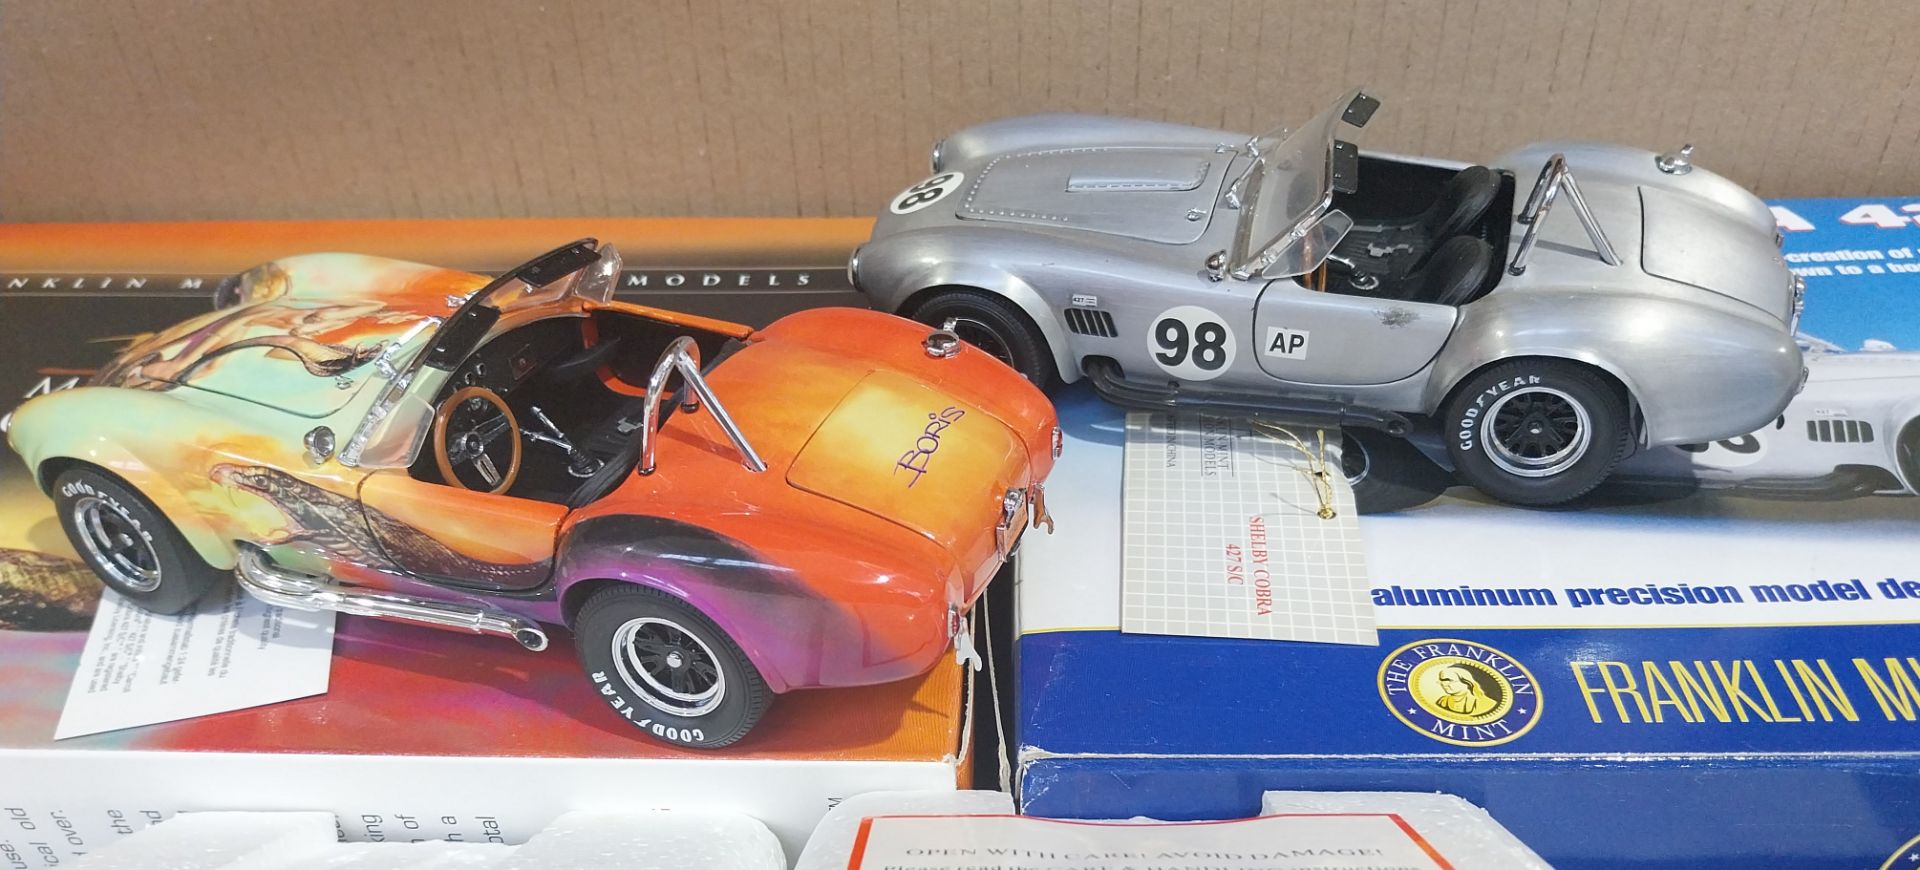 Franklin Mint. A boxed pair of 1:24 scale Shelby Cobra models - Image 5 of 5